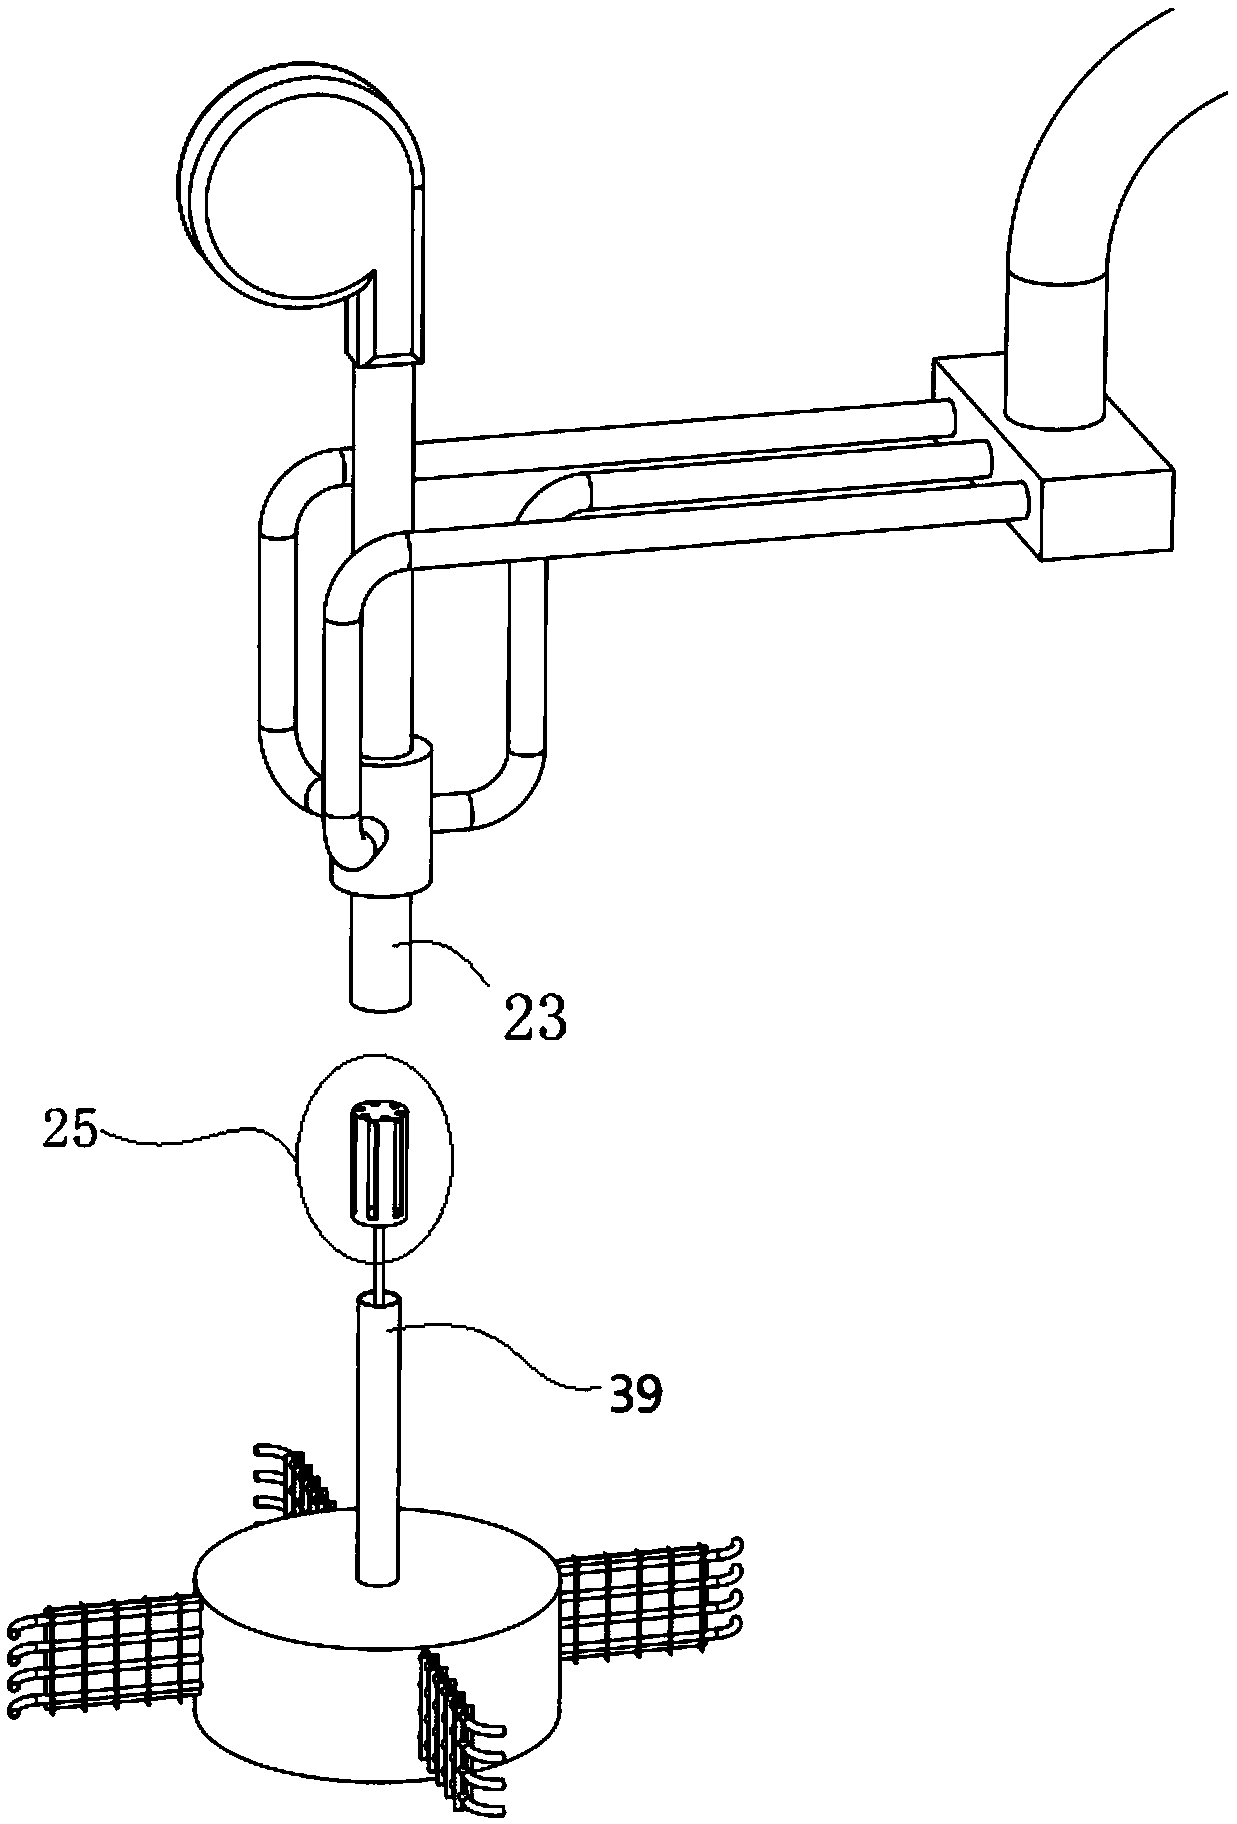 Heating aeration pool for sewage purification and method thereof